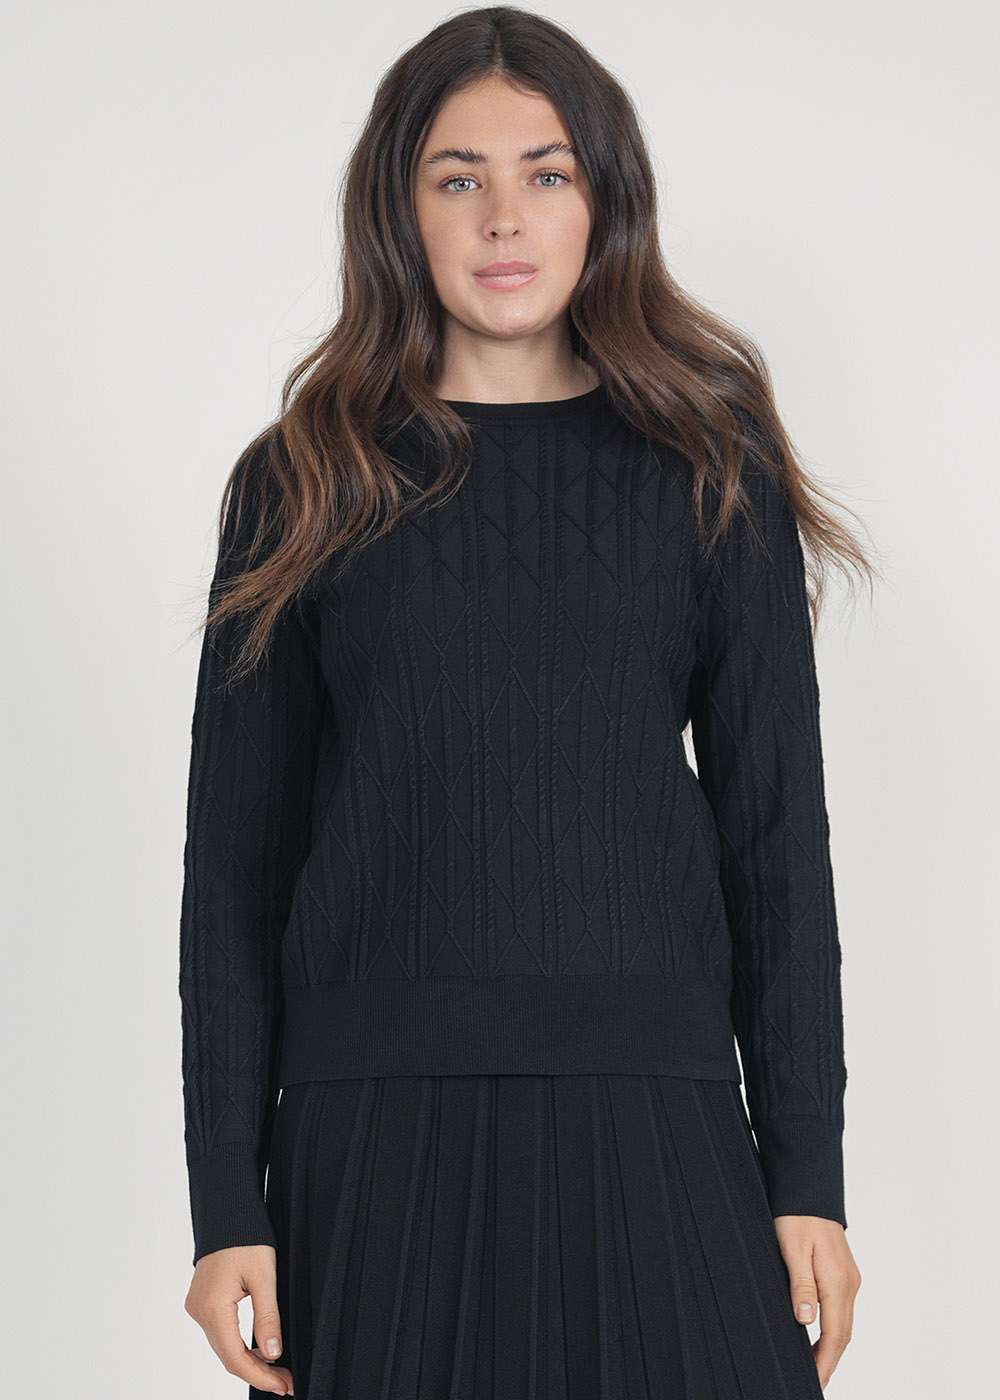 Black Knit Sweater: Relaxed Silhouette